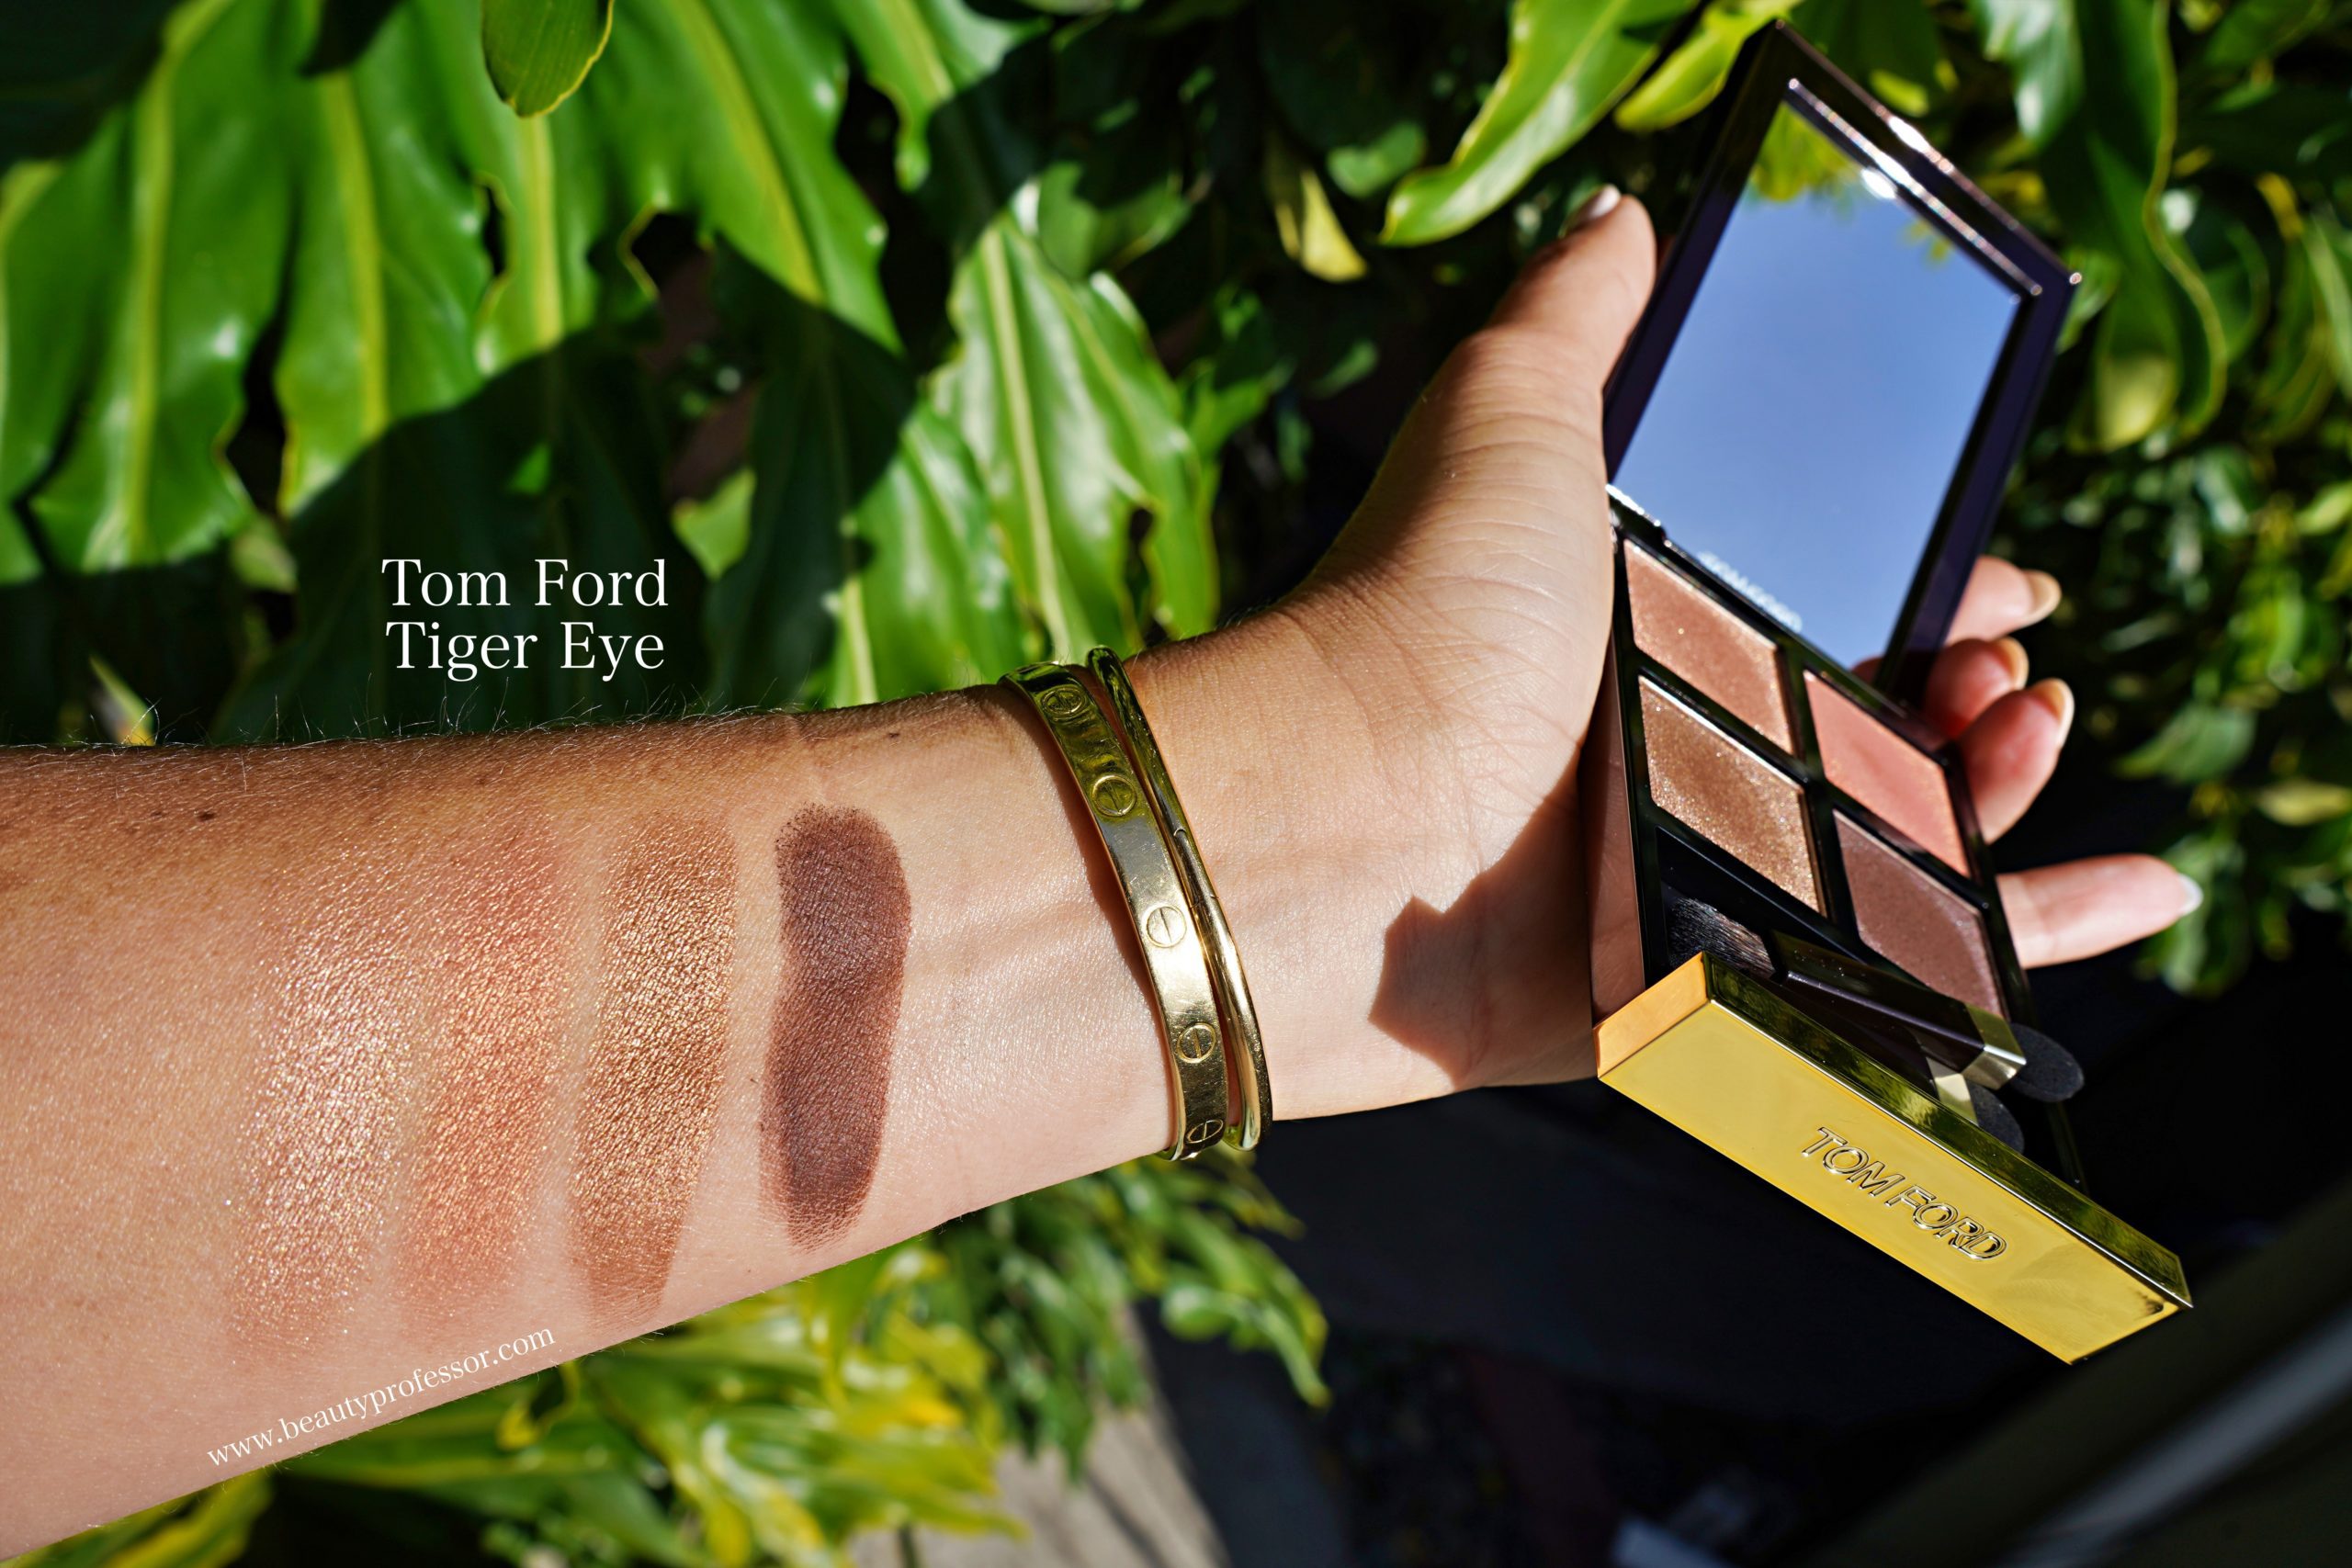 Tom Ford Eye Color Quad Creme Tiger Eye swatches from Beautylish Gift Card Event